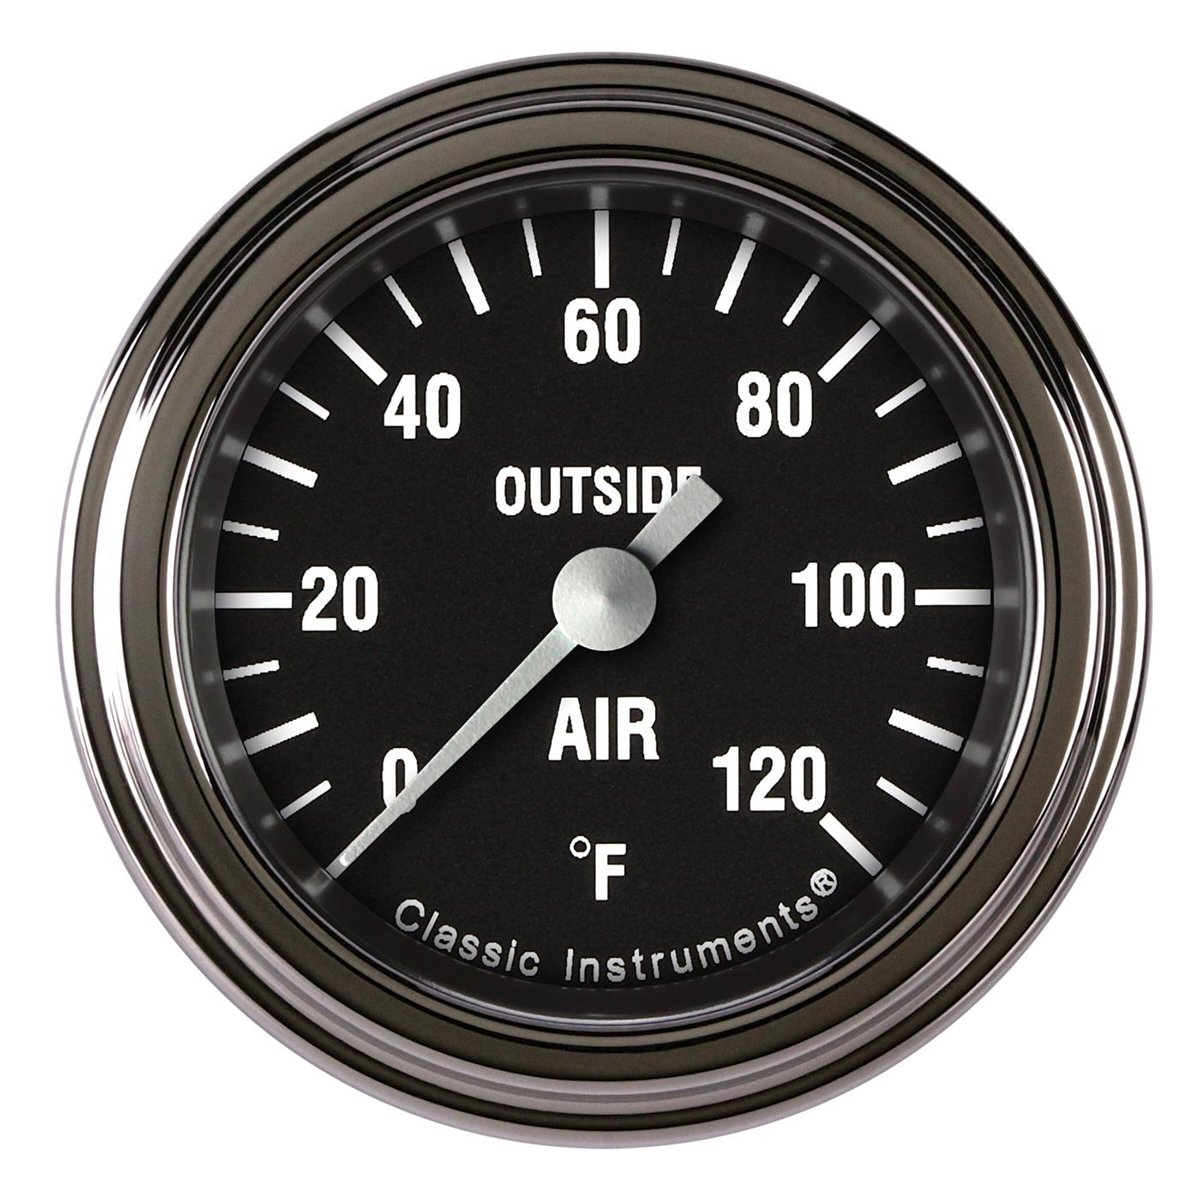 Classic Instruments HR199SLF Outside Air Temp Gauge, Hot Rod, 0-120 Degrees F, Electric, Analog, Full Sweep, 2-1/8 in Diameter, 1/8 in NPT Thread Sender, Low Step Stainless Bezel, Flat Lens, Black Face, Each